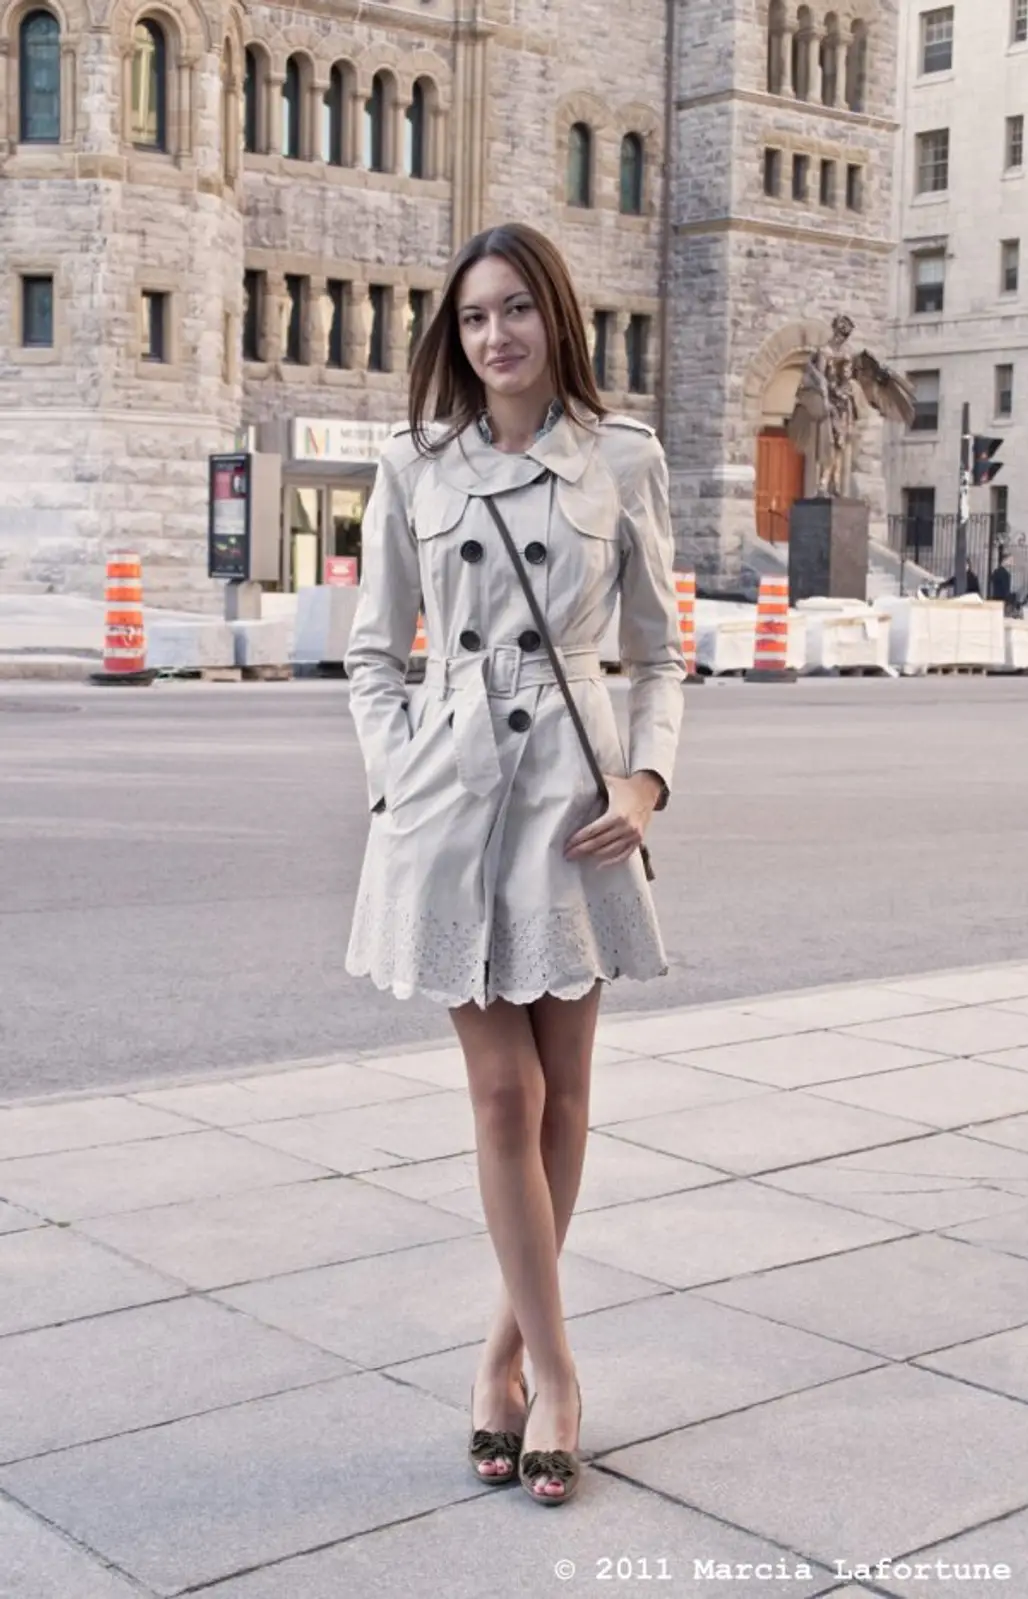 A Light Trench Coat